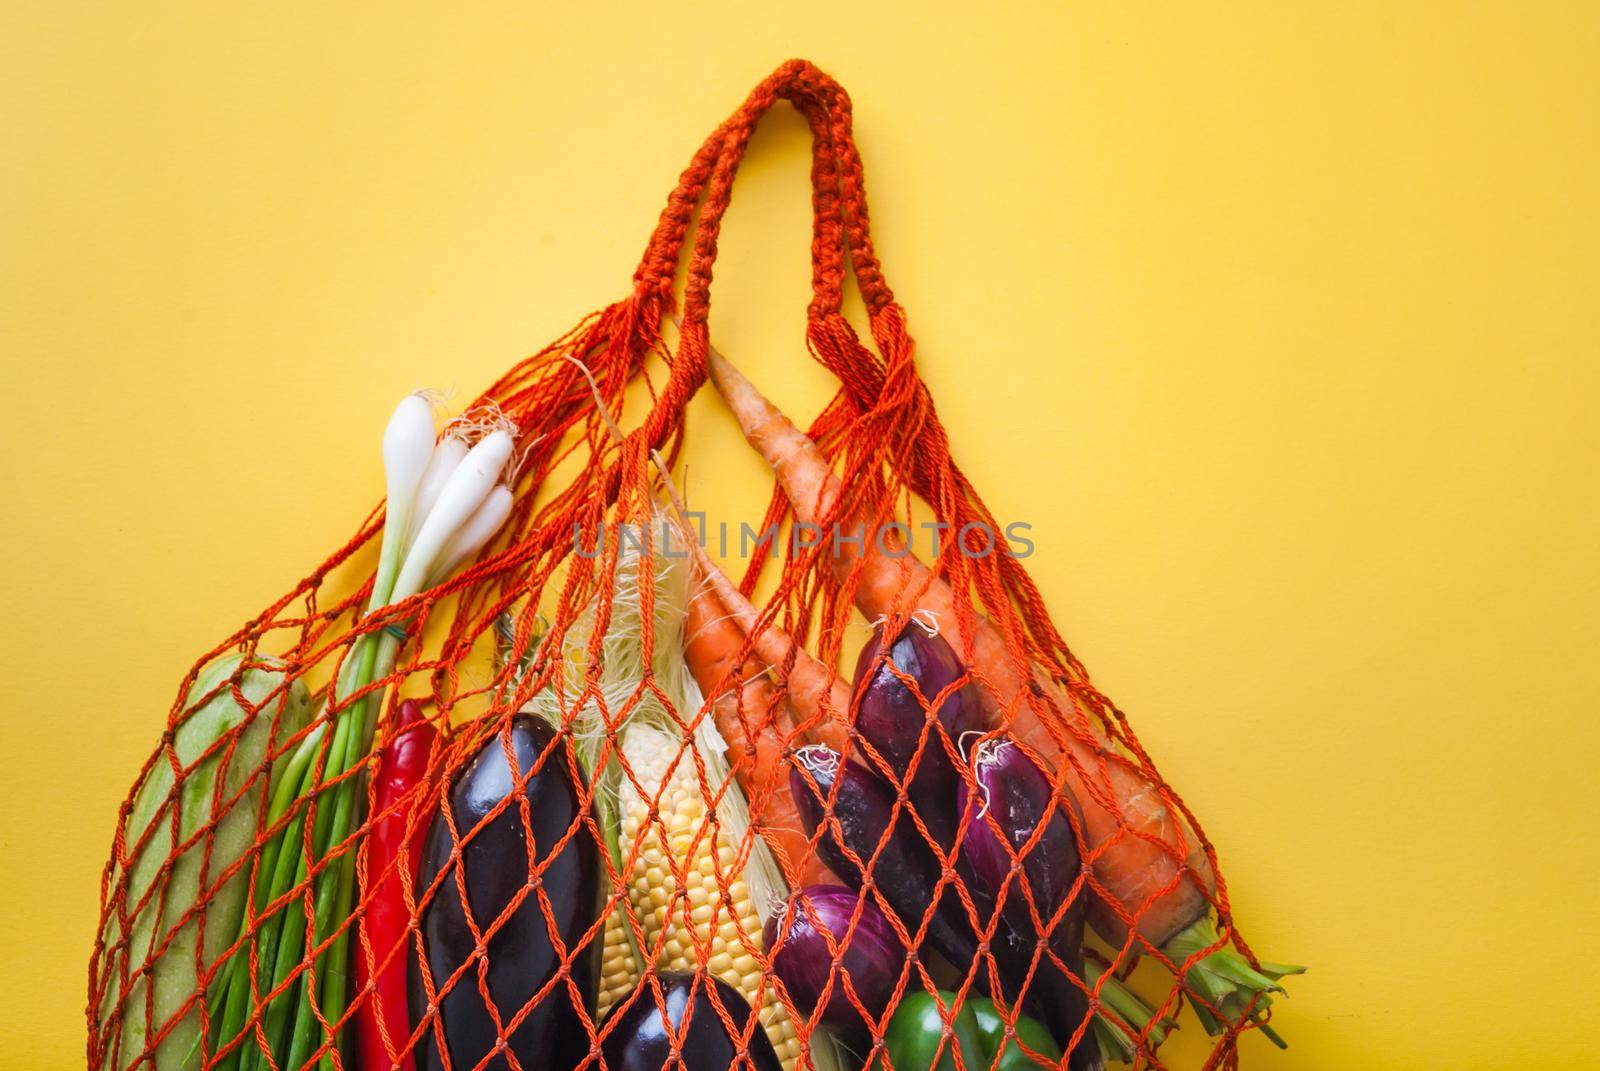 zero waste shopping concept. vegetables in mesh bag without plastic by maramorosz